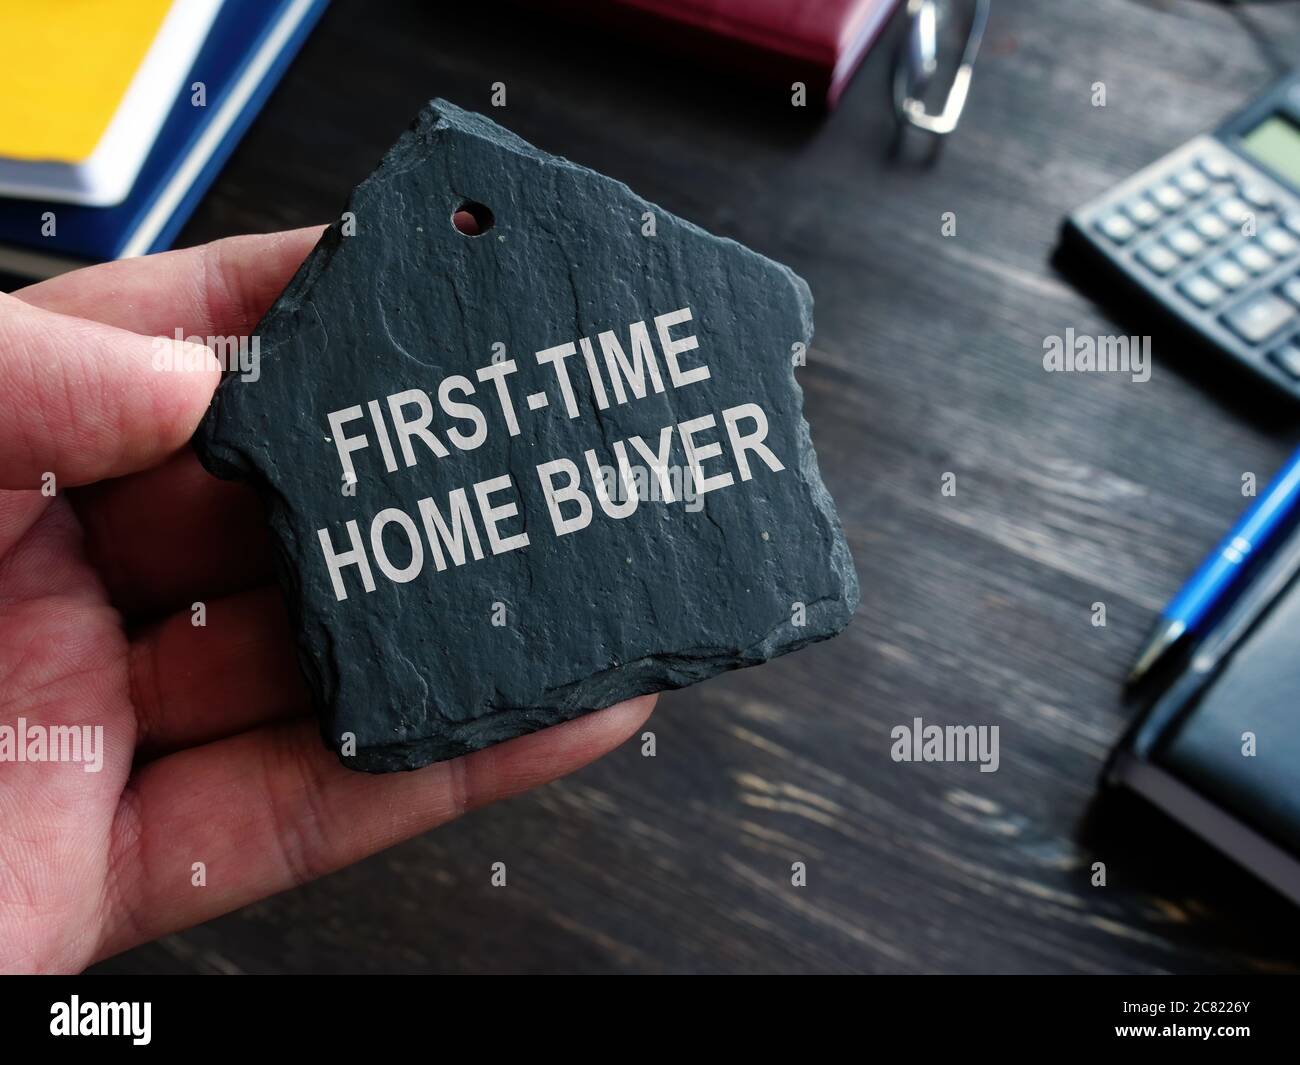 First time home buyer words on the stone house symbol. Stock Photo